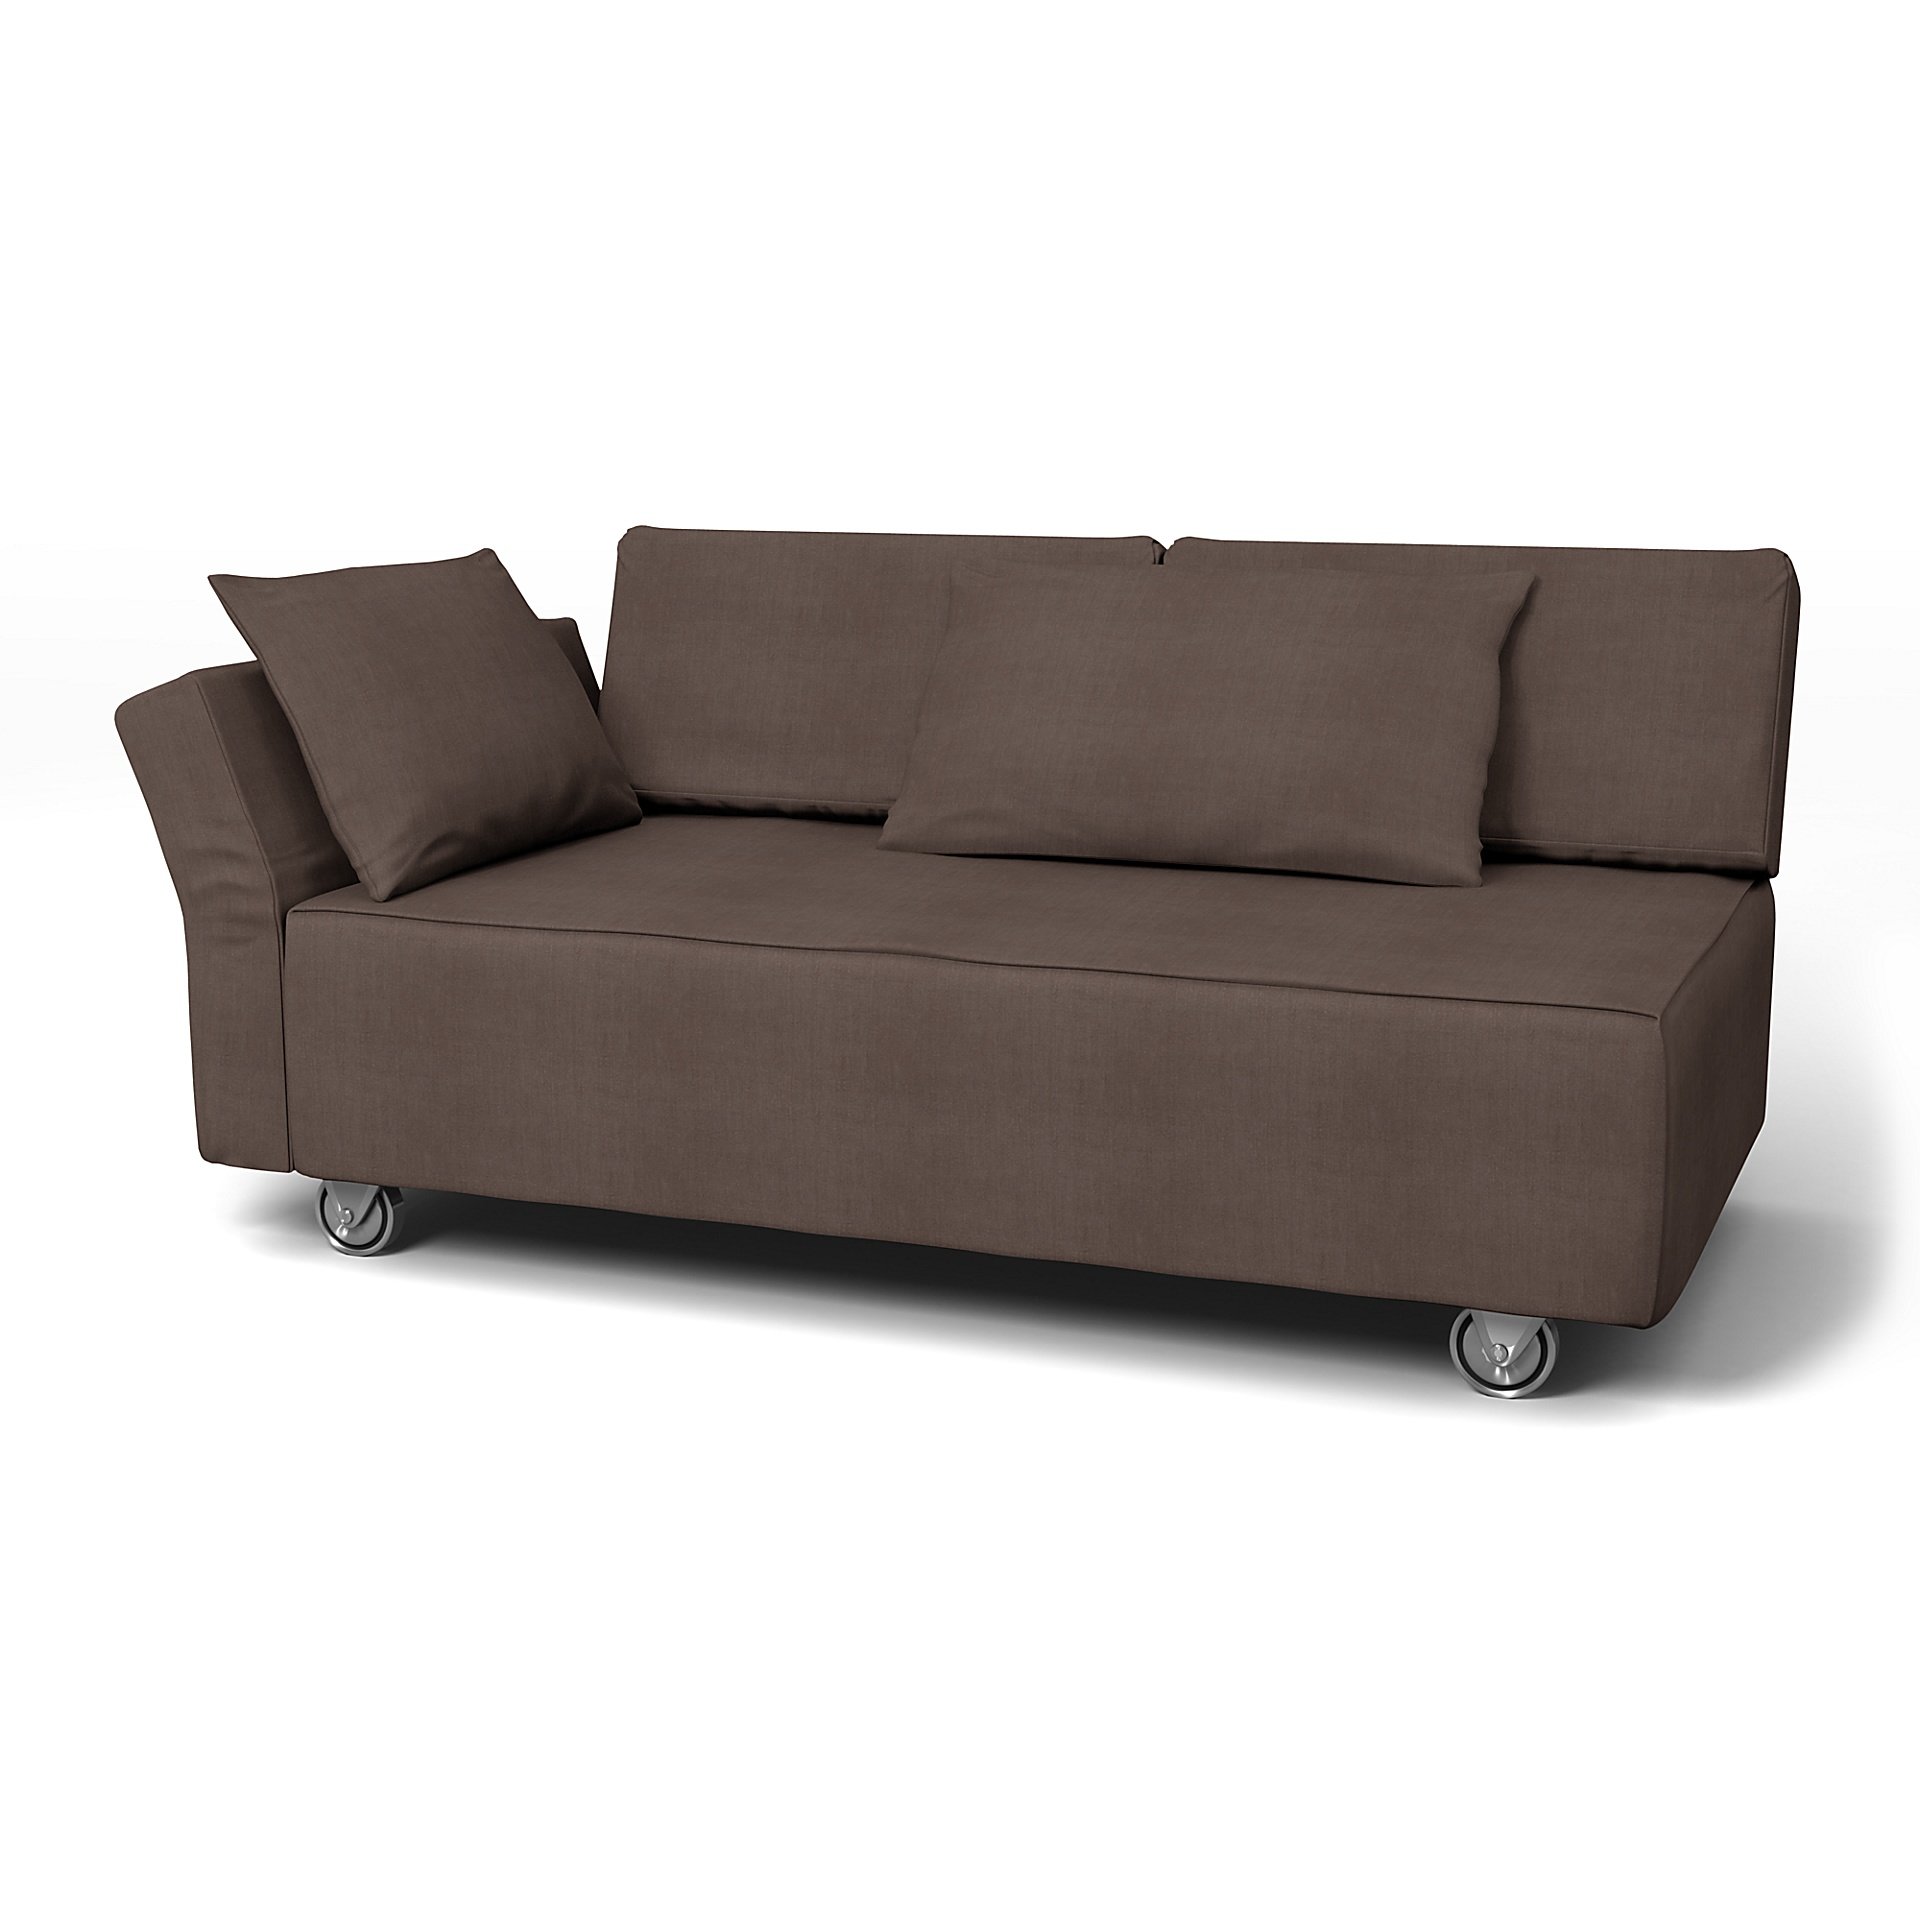 IKEA - Falsterbo 2 Seat Sofa with Left Arm Cover, Cocoa, Linen - Bemz